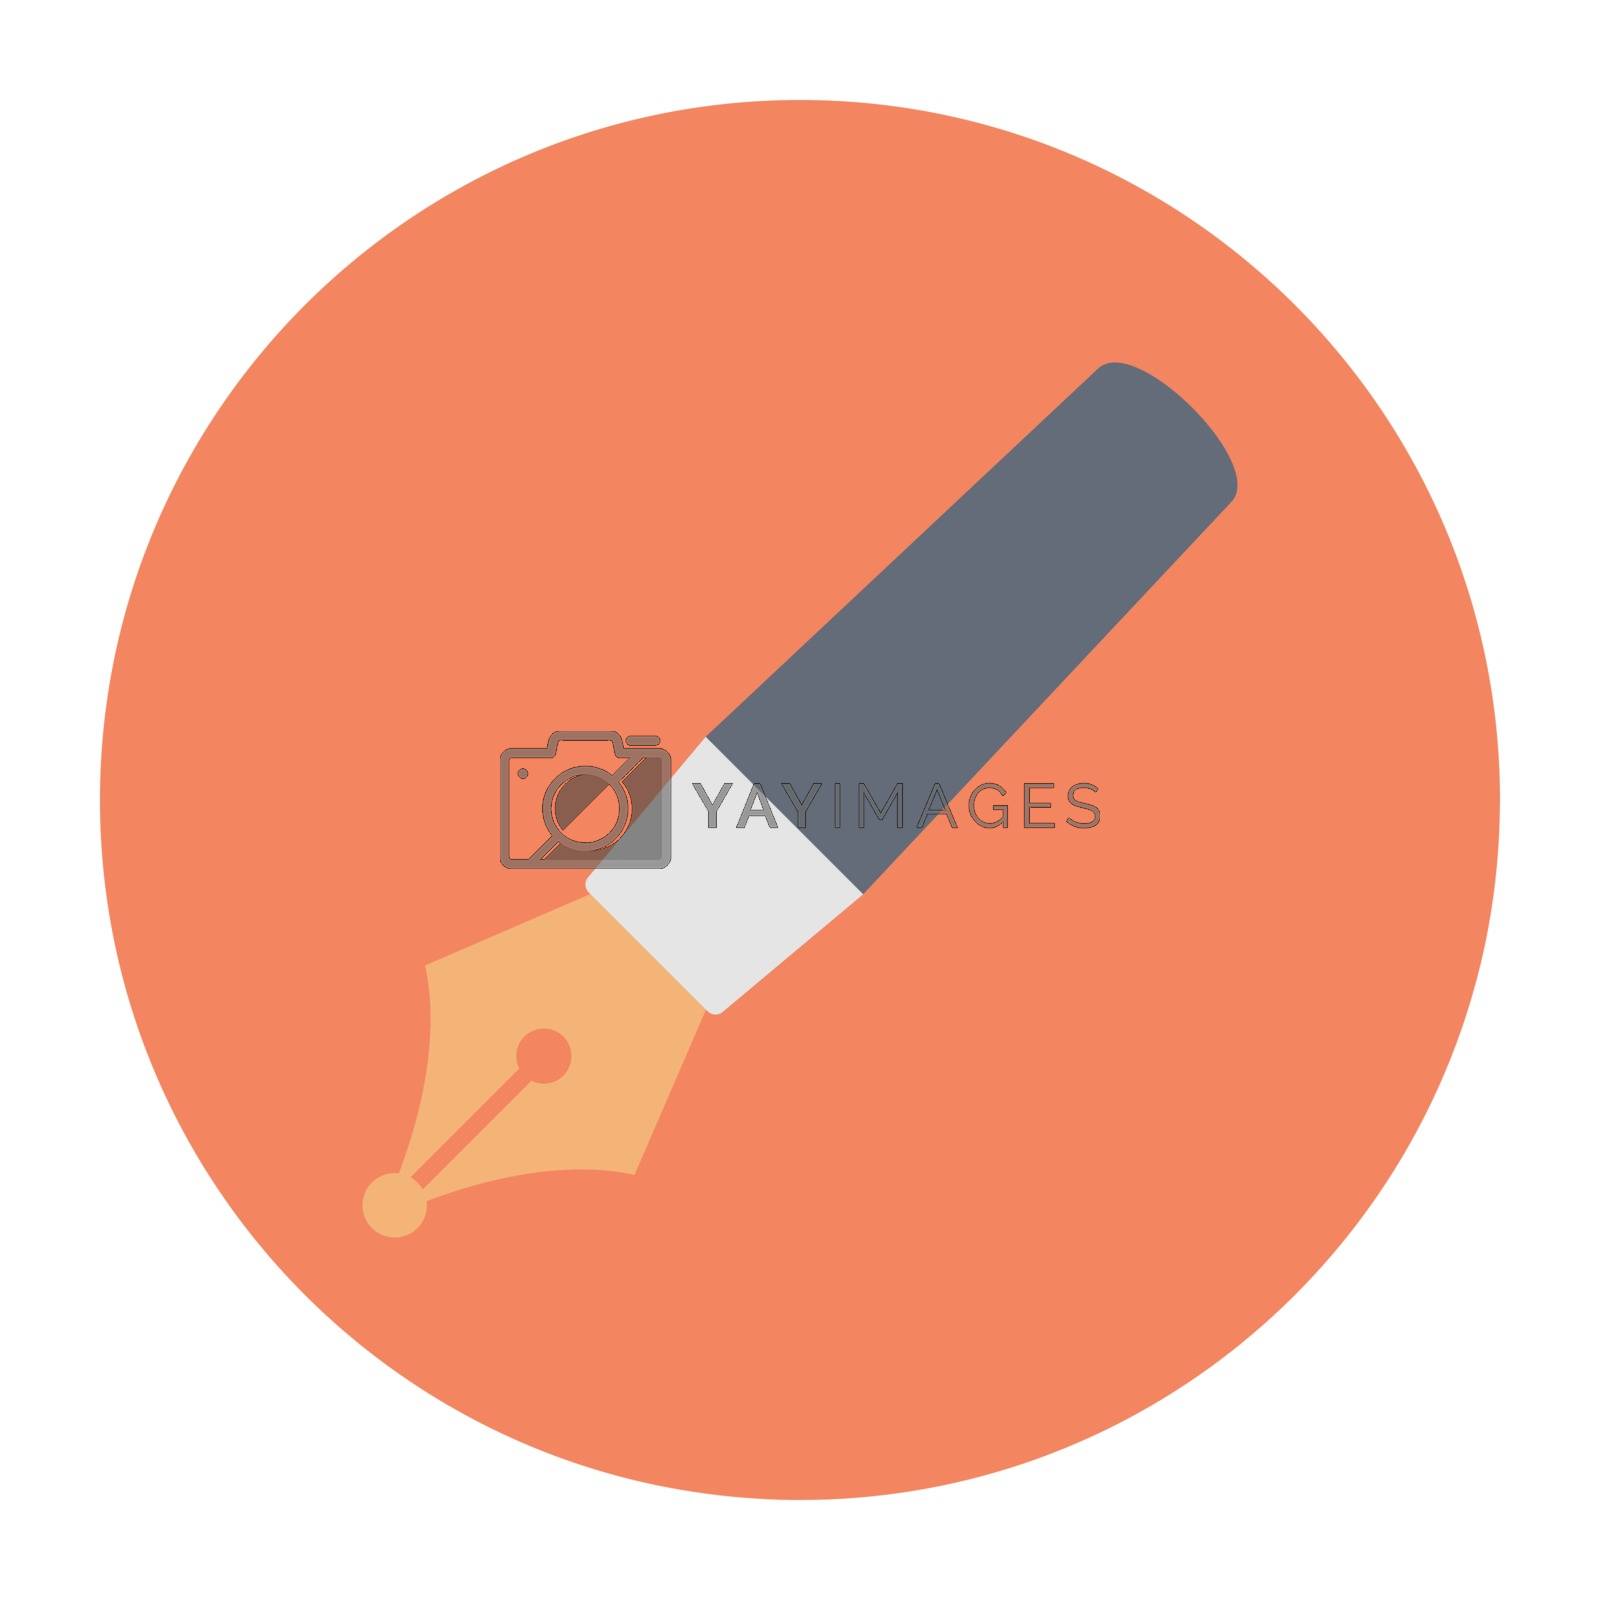 Royalty free image of write by vectorstall